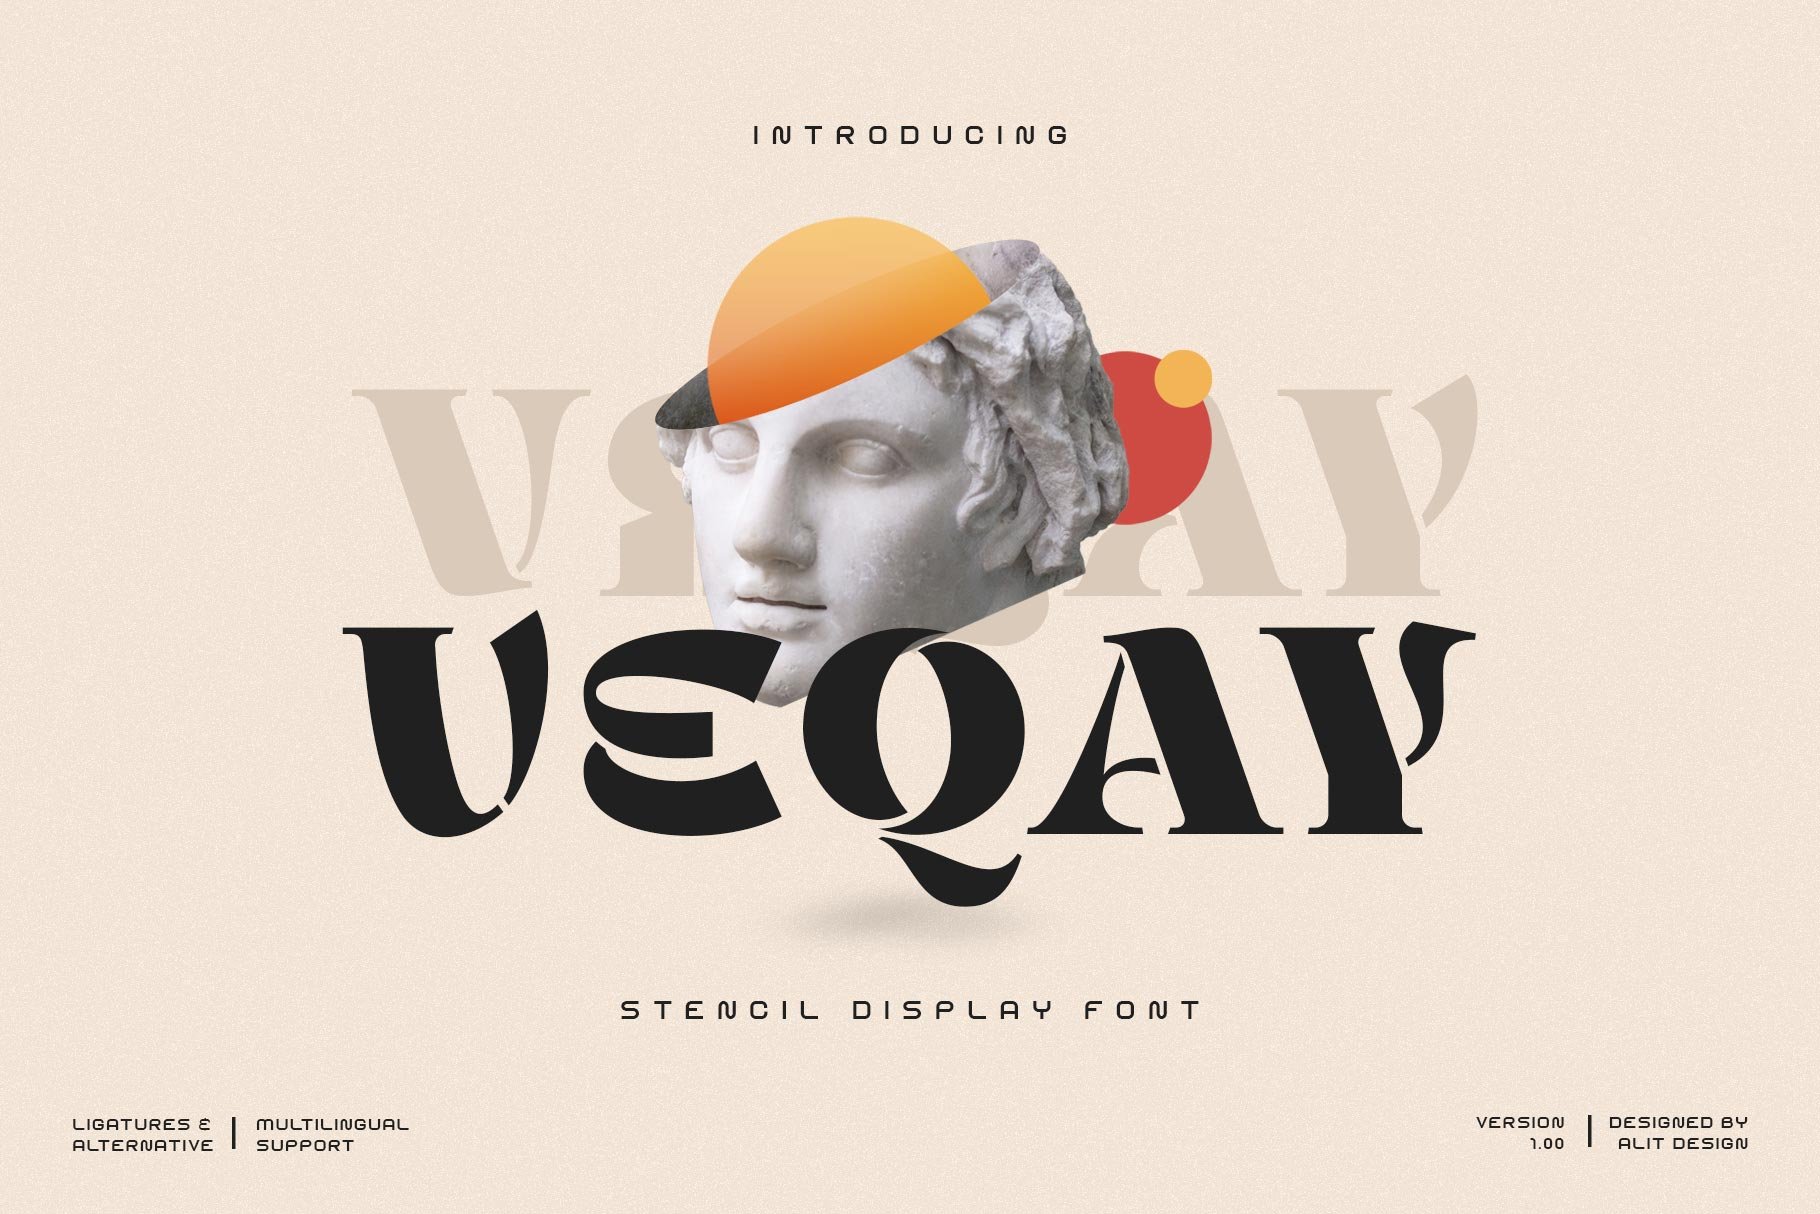 VEQAY Typeface cover image.